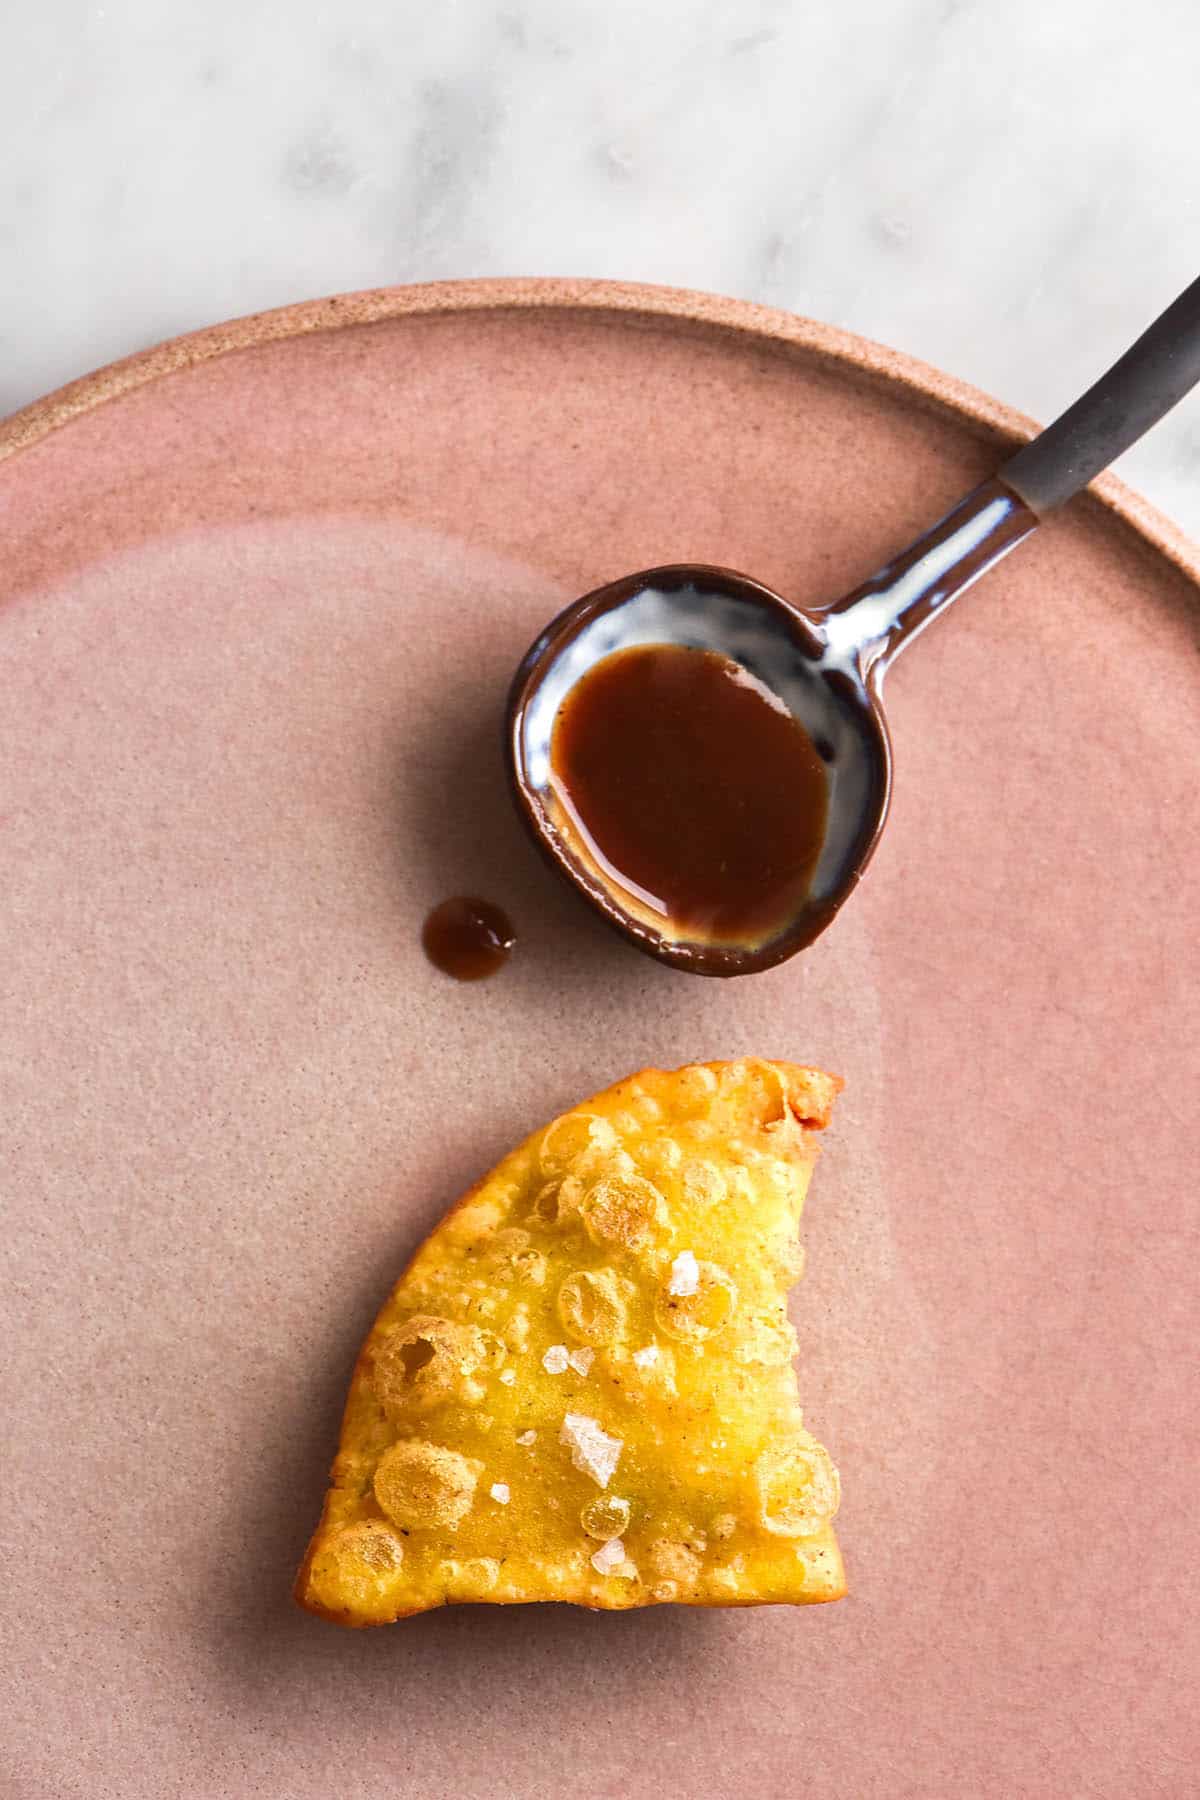 An aerial image of a crispy fried gluten free samosa on a pale pink ceramic plate. Above the samosa sits a ceramic spoon with imli (tamarind) chutney